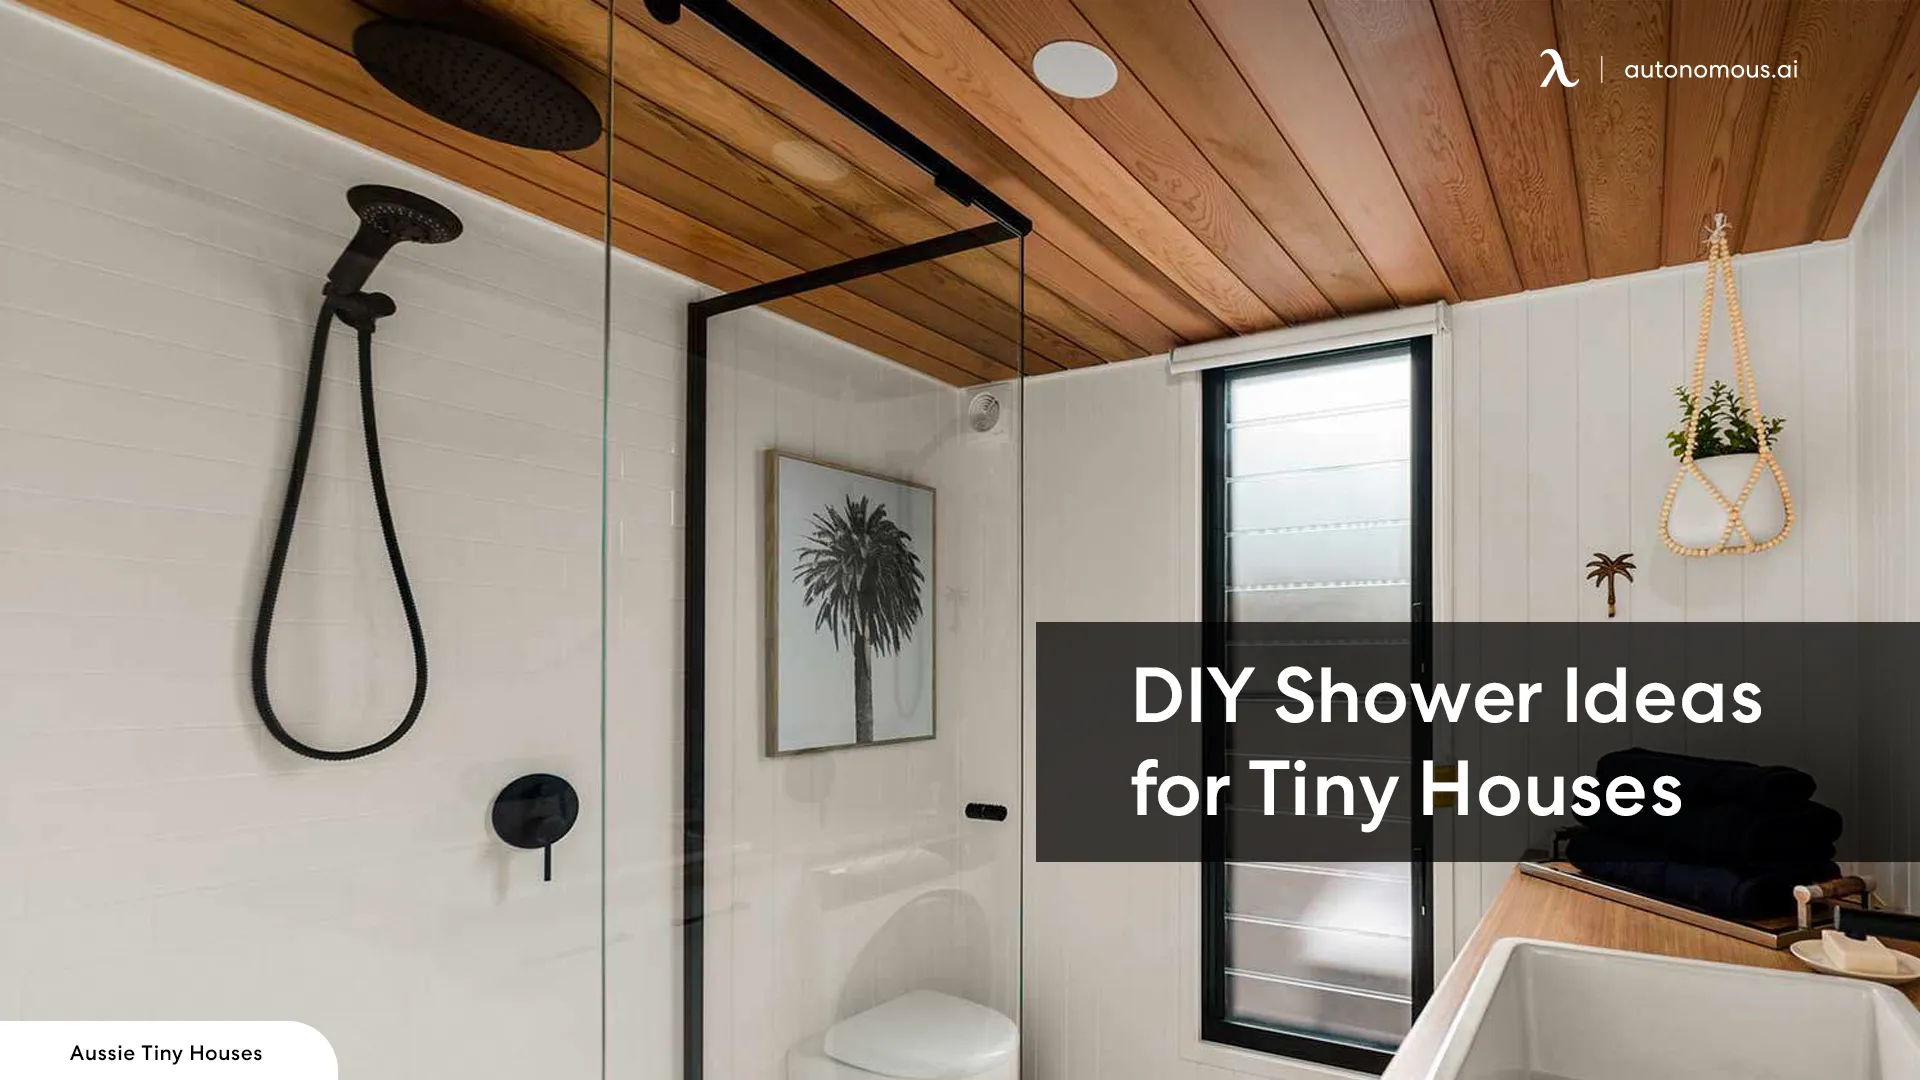 Refreshingly Practical: DIY Shower Ideas for Tiny Houses